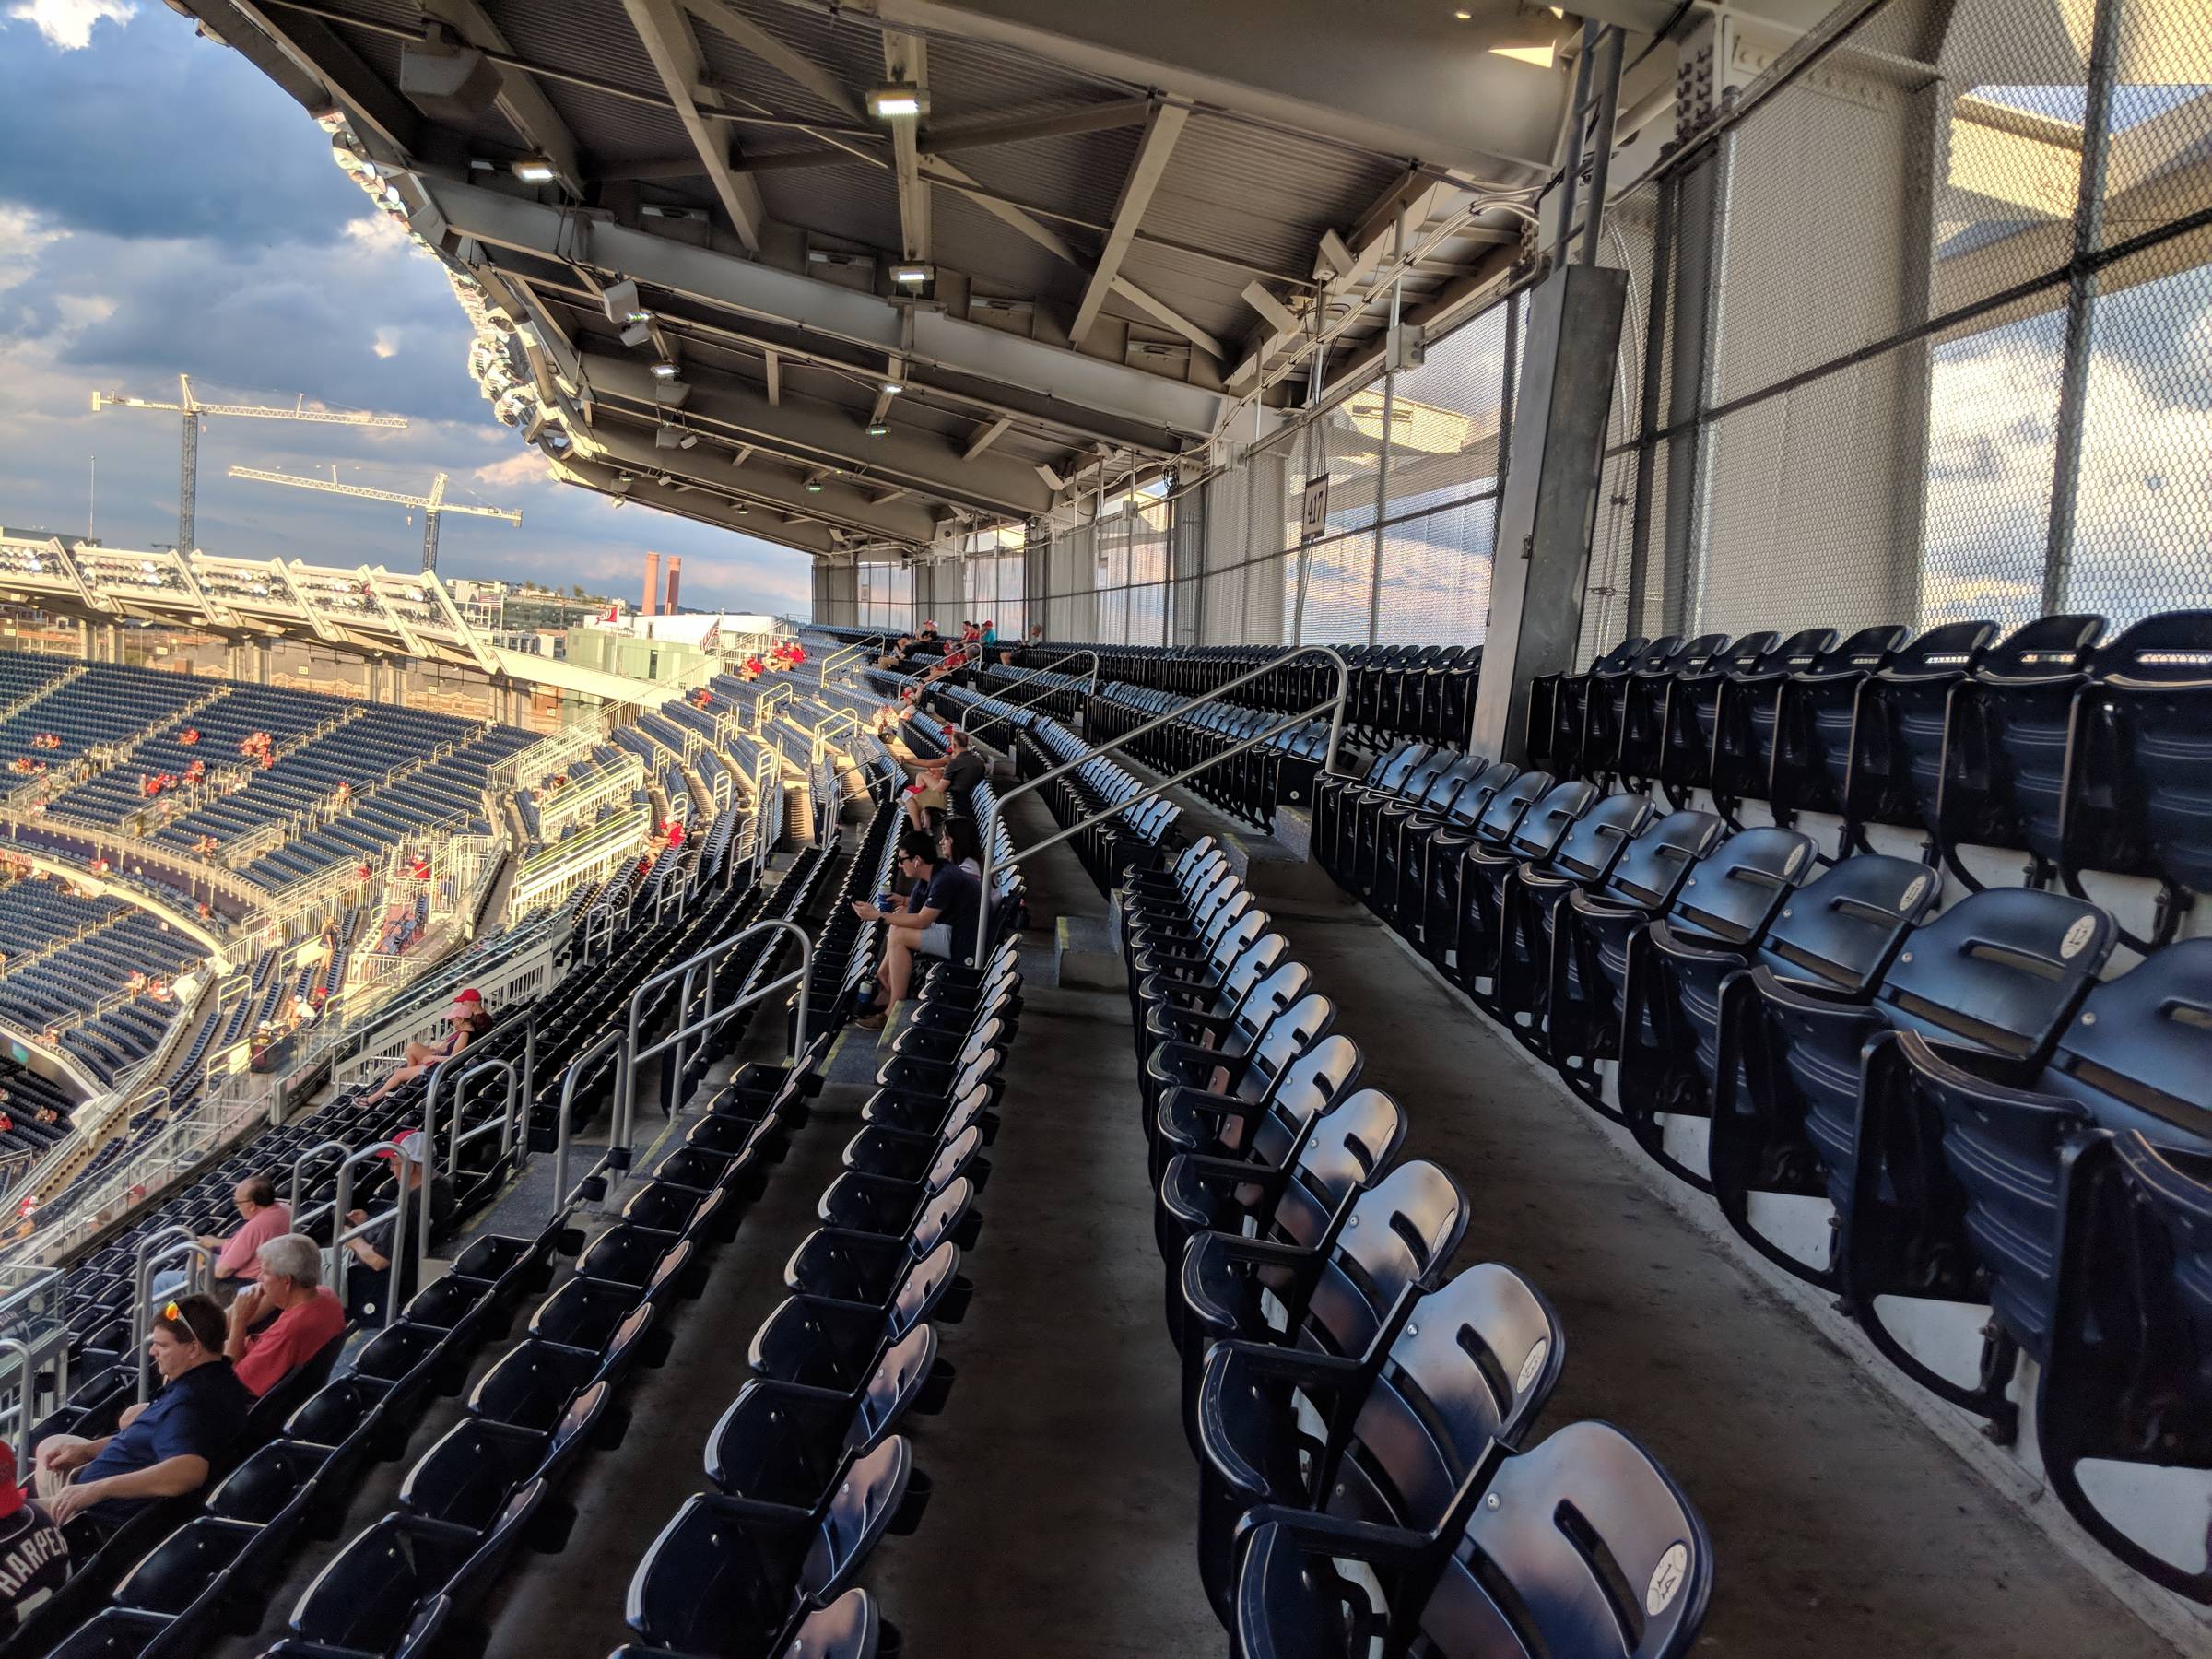 upper gallery seats at Nationals Park under cover